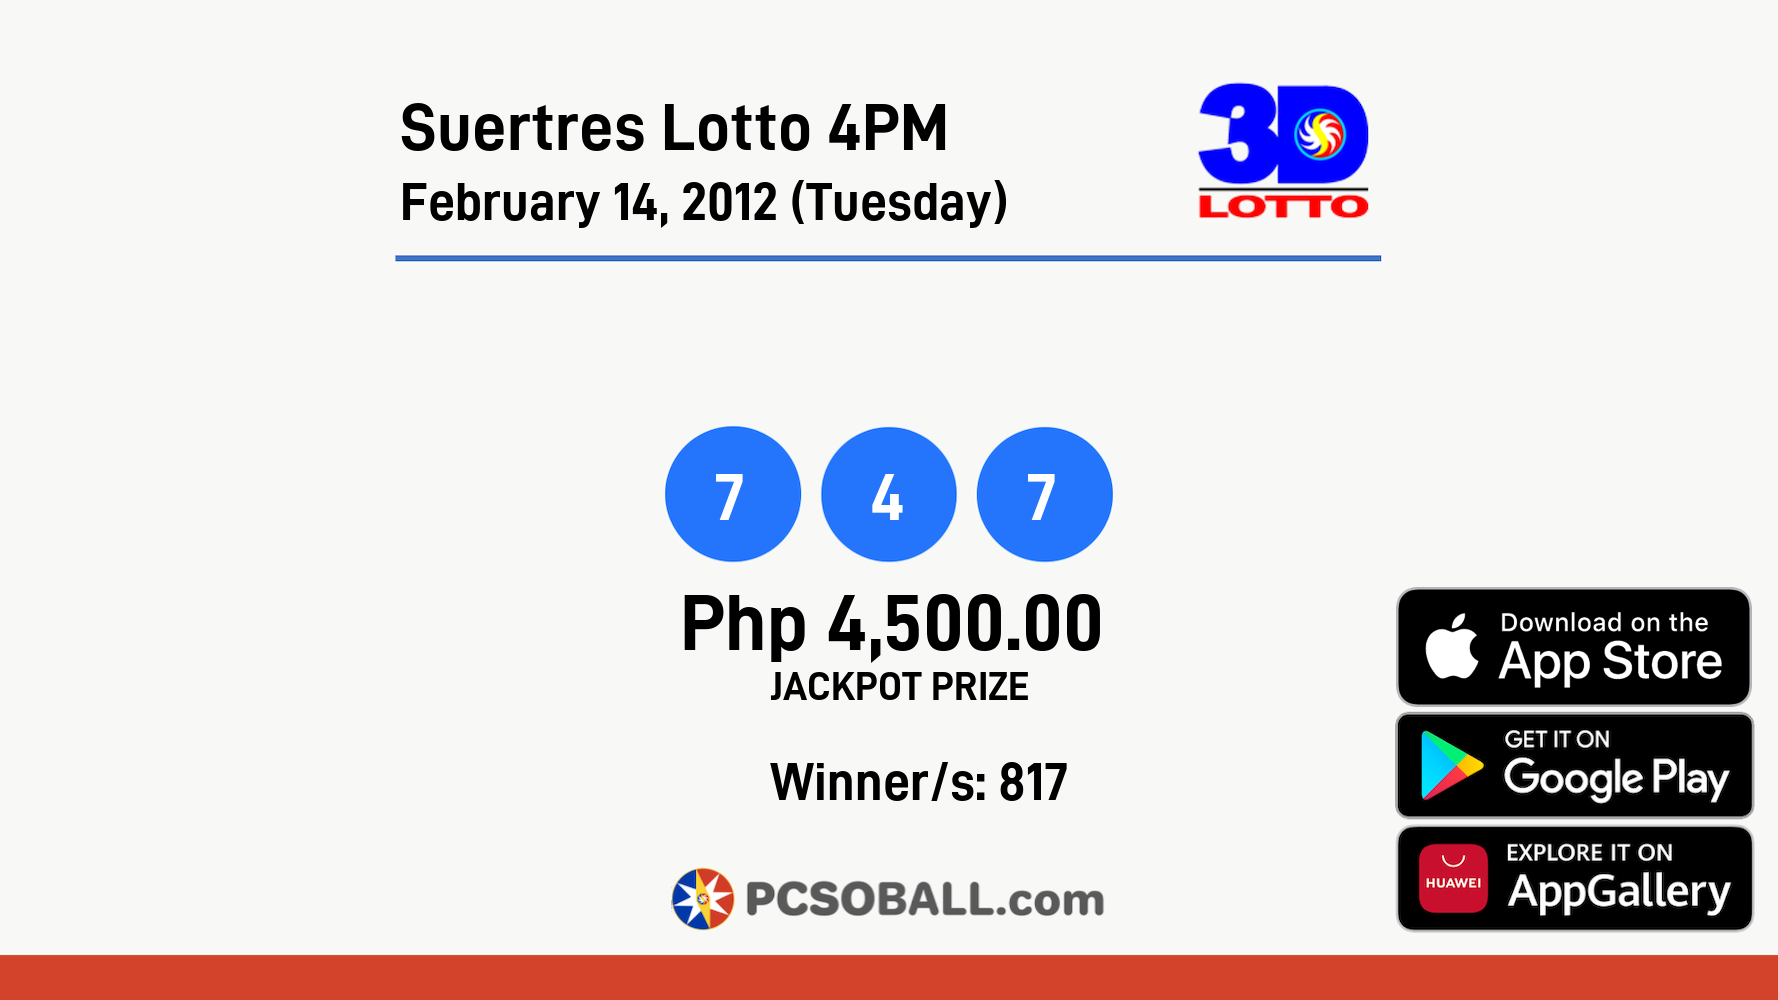 Suertres Lotto 4PM February 14, 2012 (Tuesday) Result